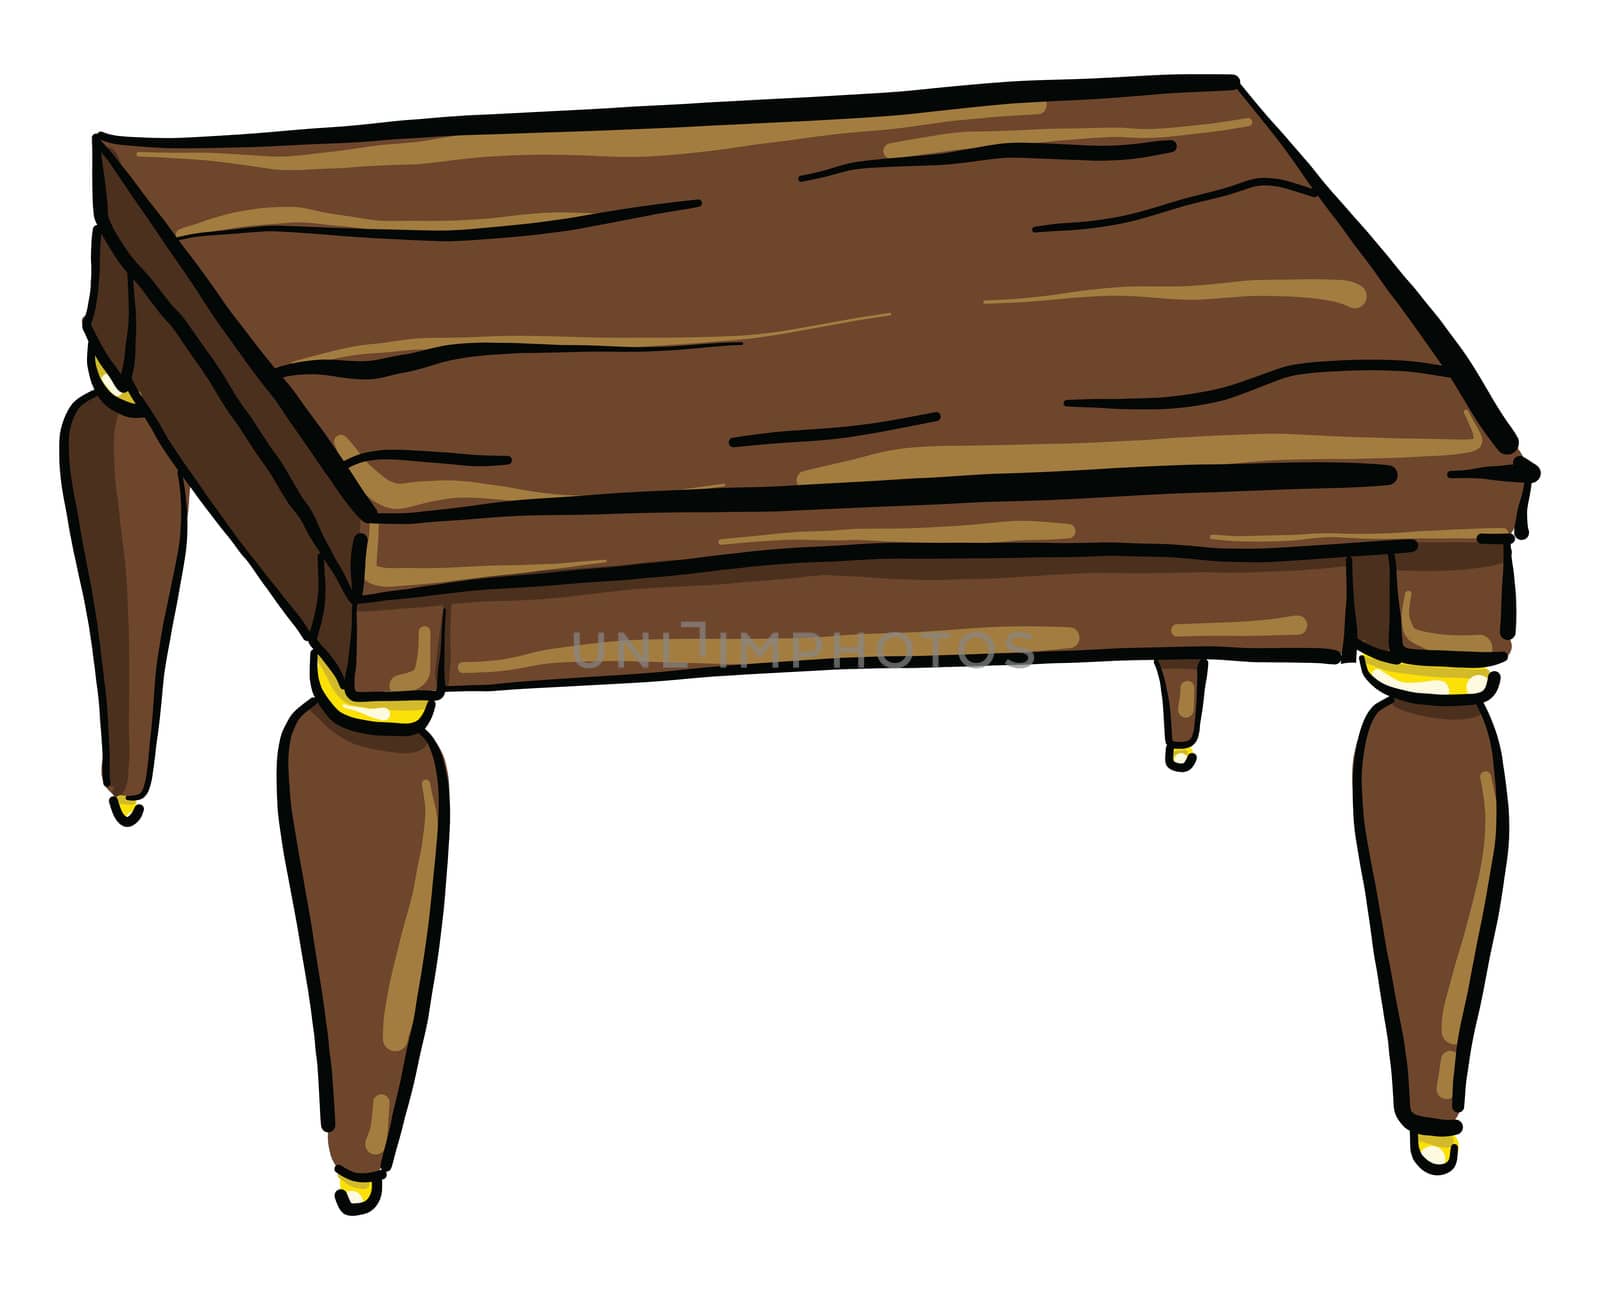 Wooden table , illustration, vector on white background